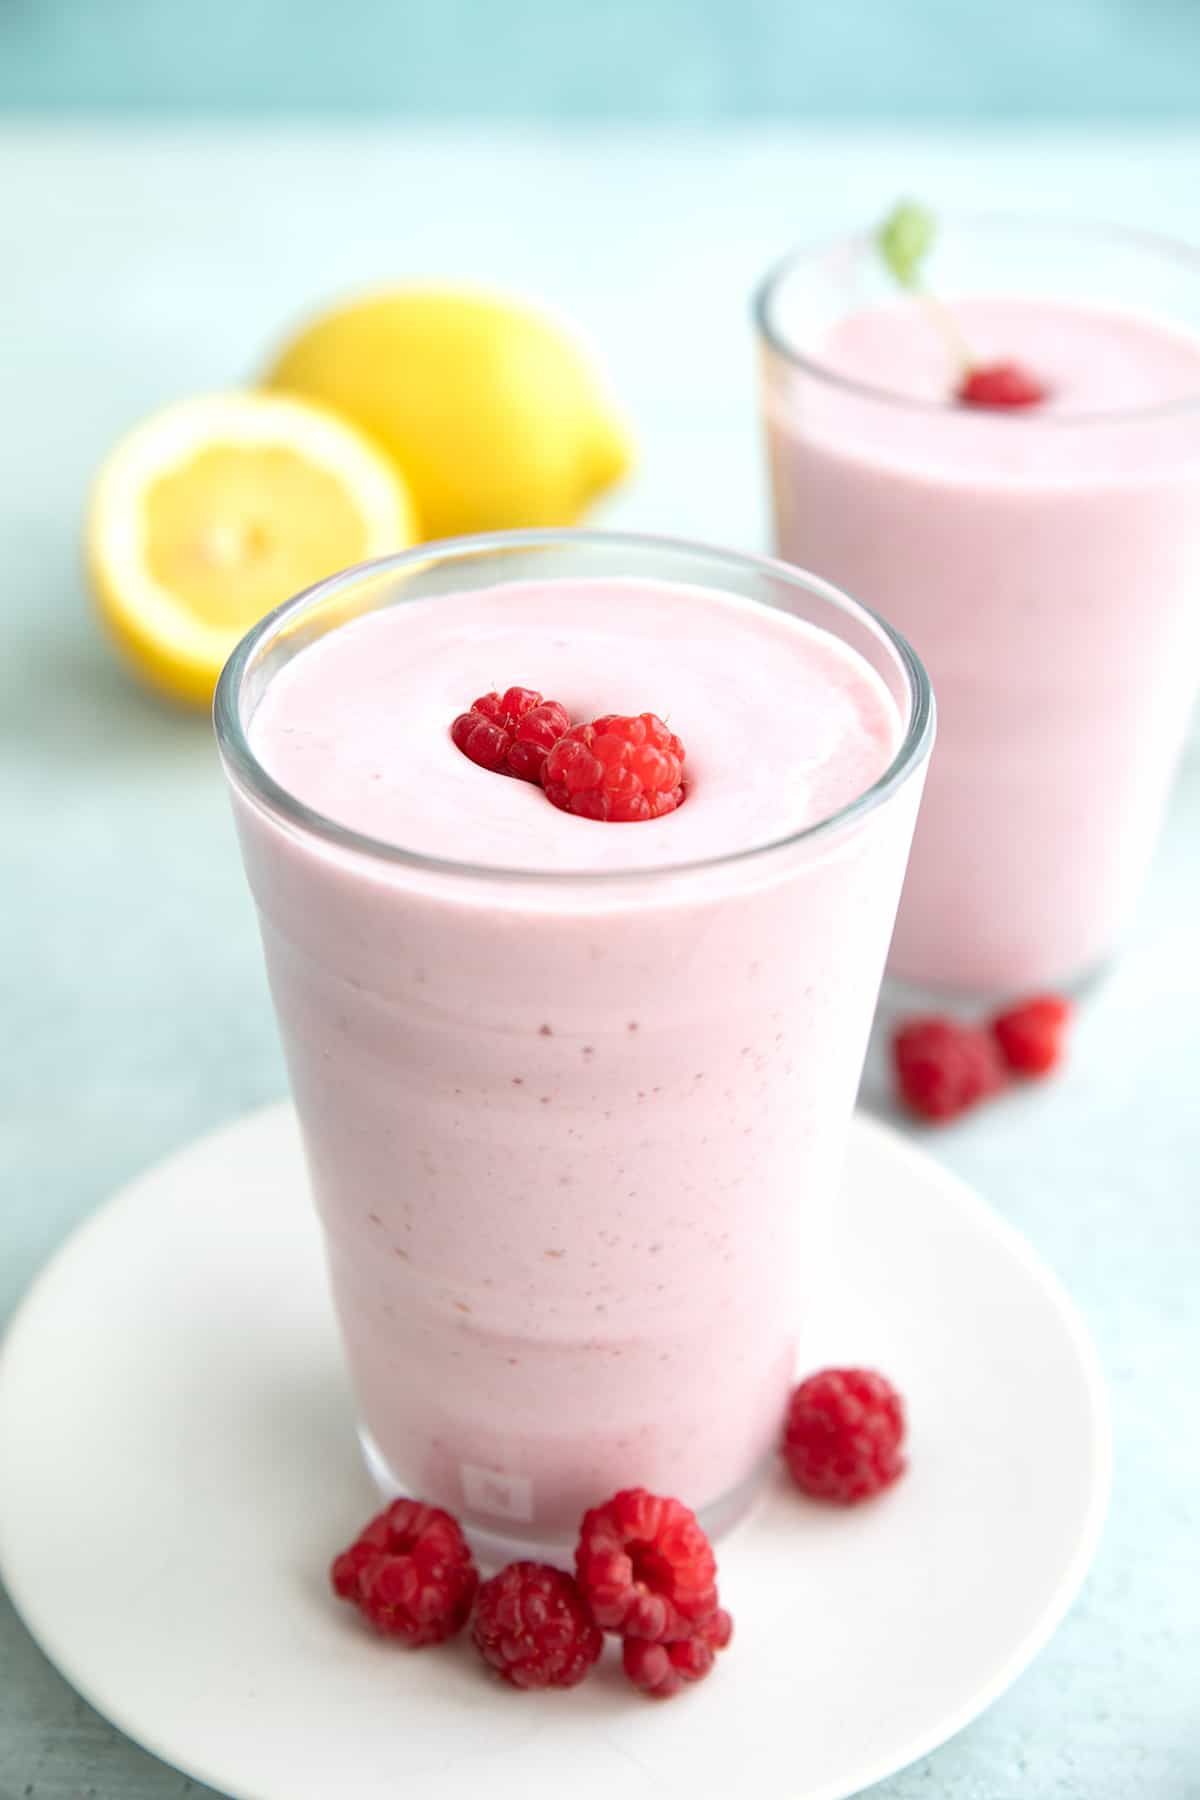 A keto protein shake in a glass on a white plate with raspberries around it and lemon in the background.